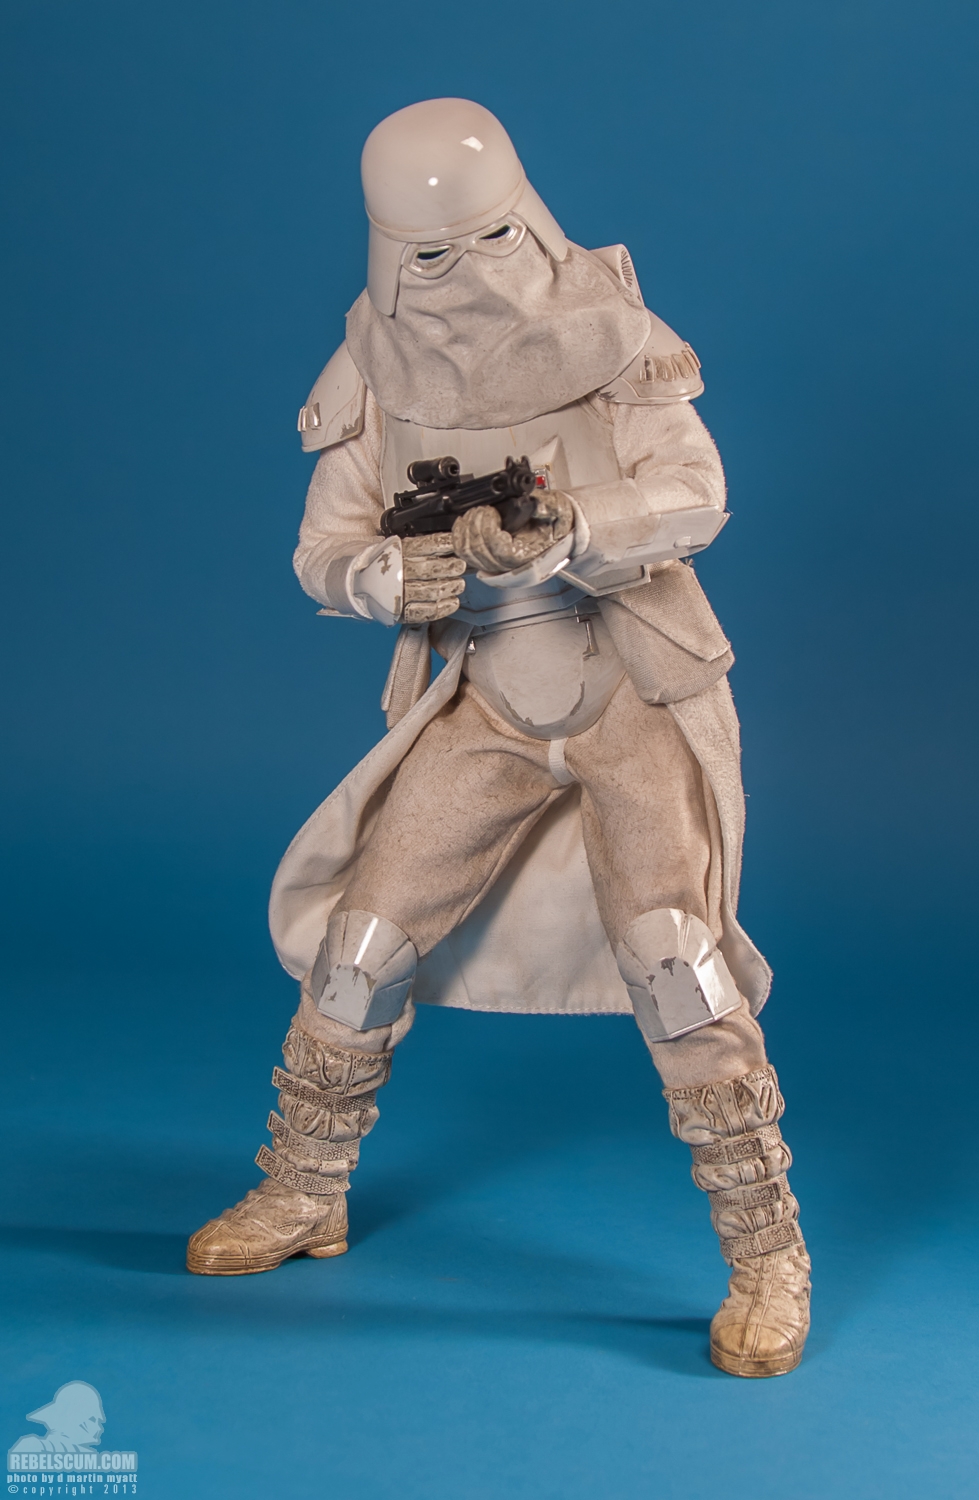 Snowtrooper_Militaries_Of_Star_Wars_Sideshow_Collectibles-10.jpg